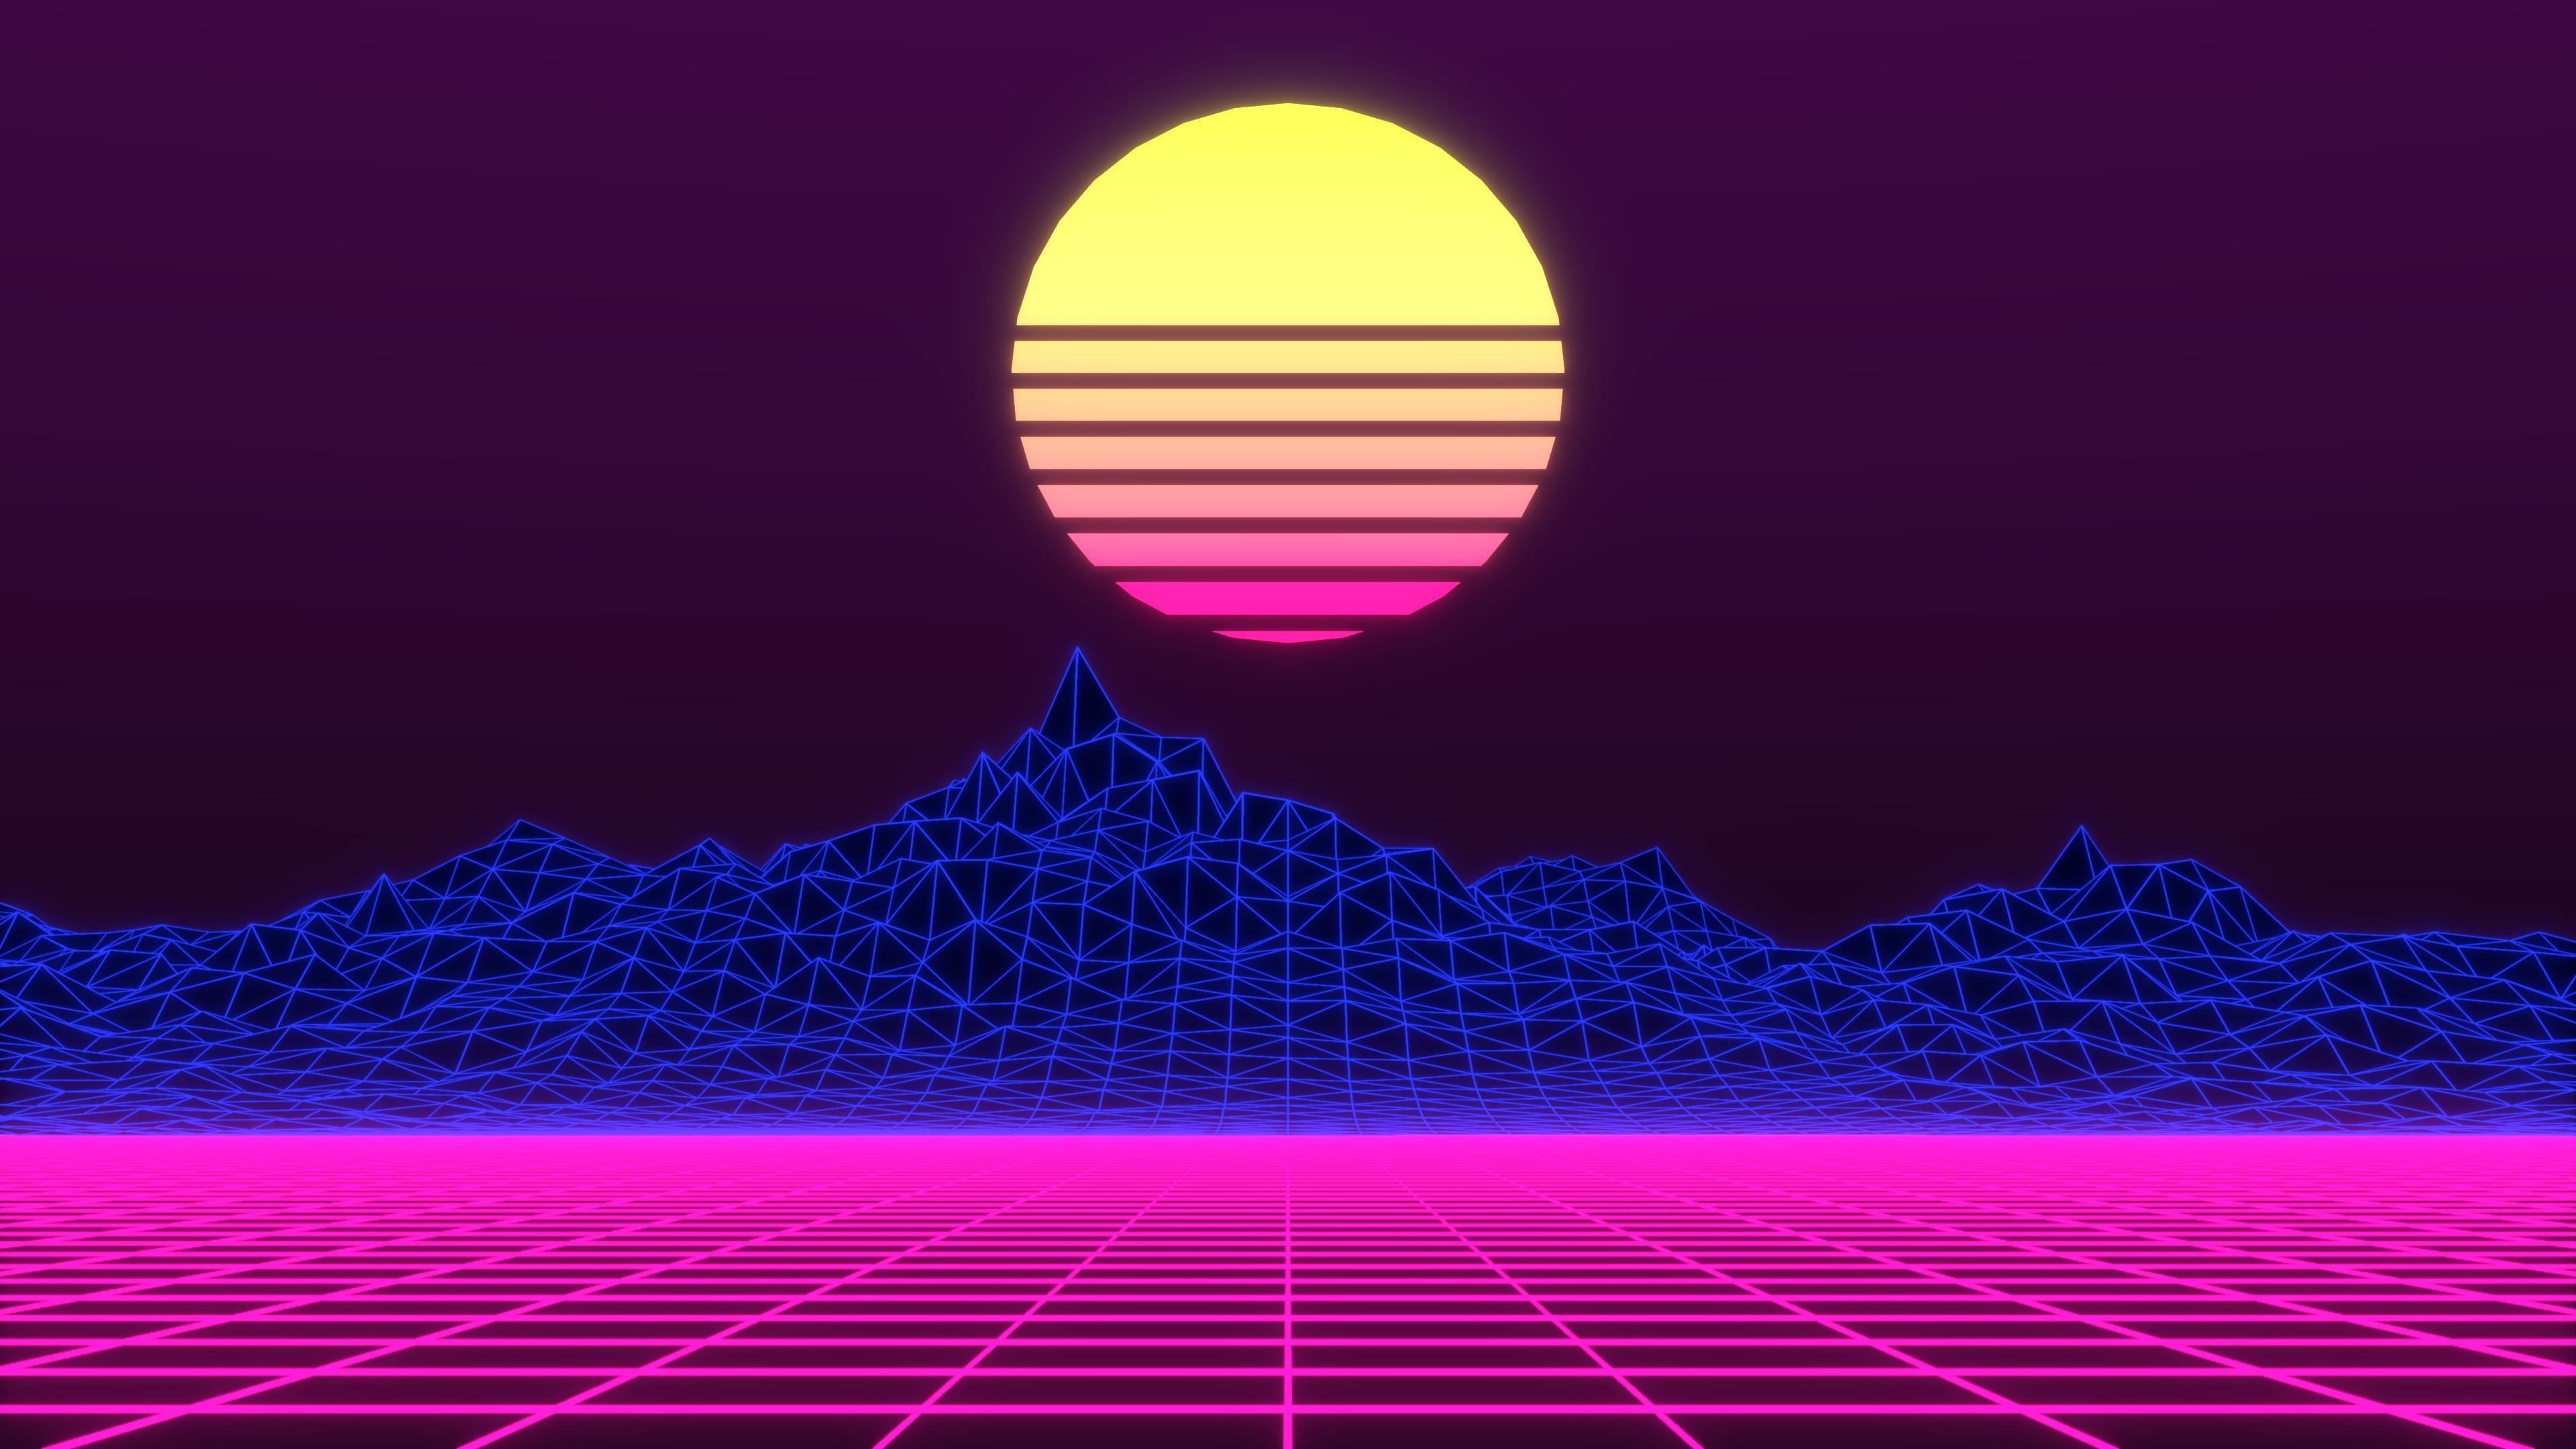 A neon landscape with a sun in the background - Low poly